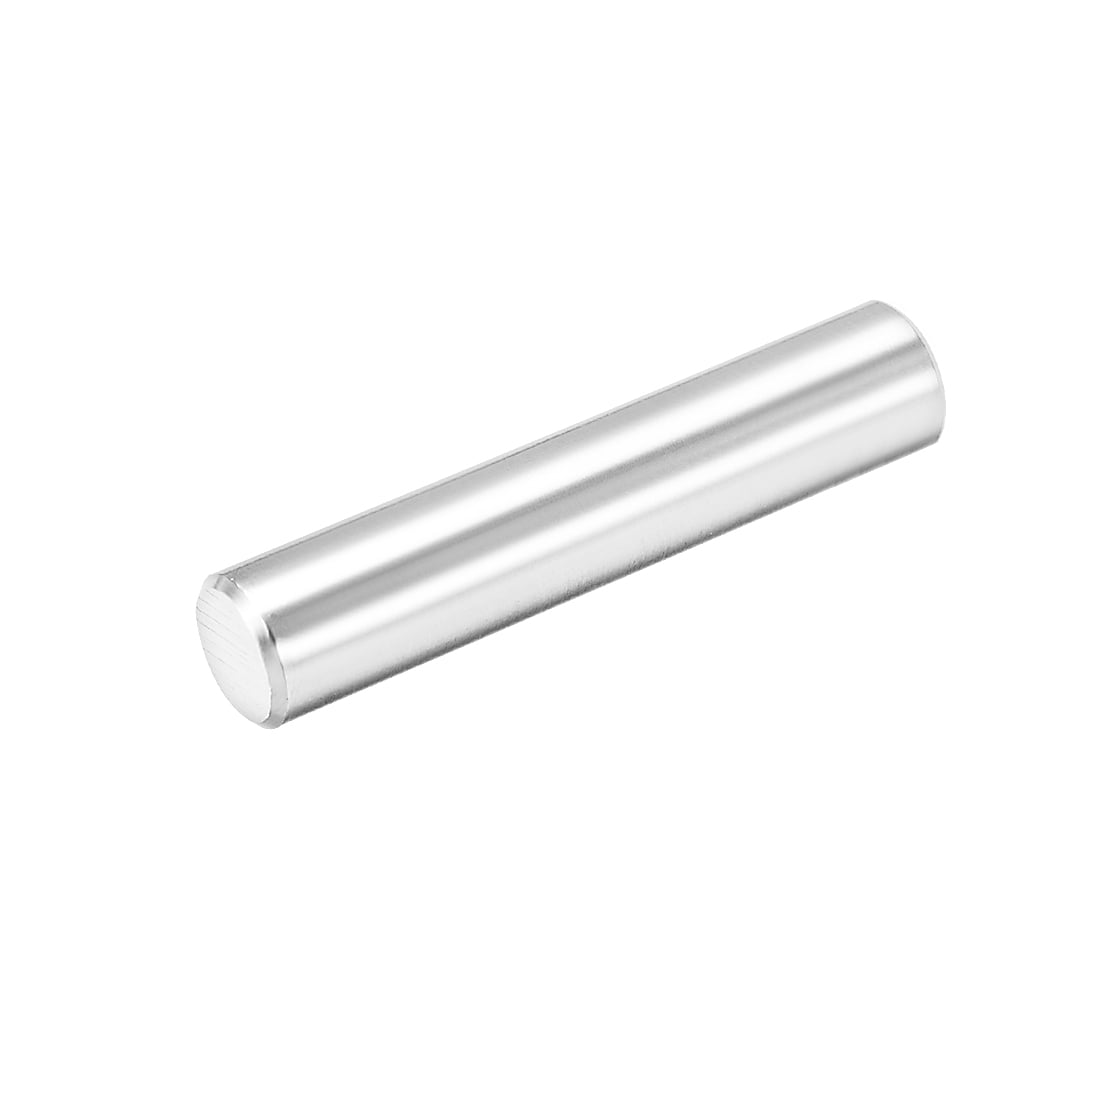 3/8" x 4" Long, Stainless Steel Smooth Dowel 25pcs. 